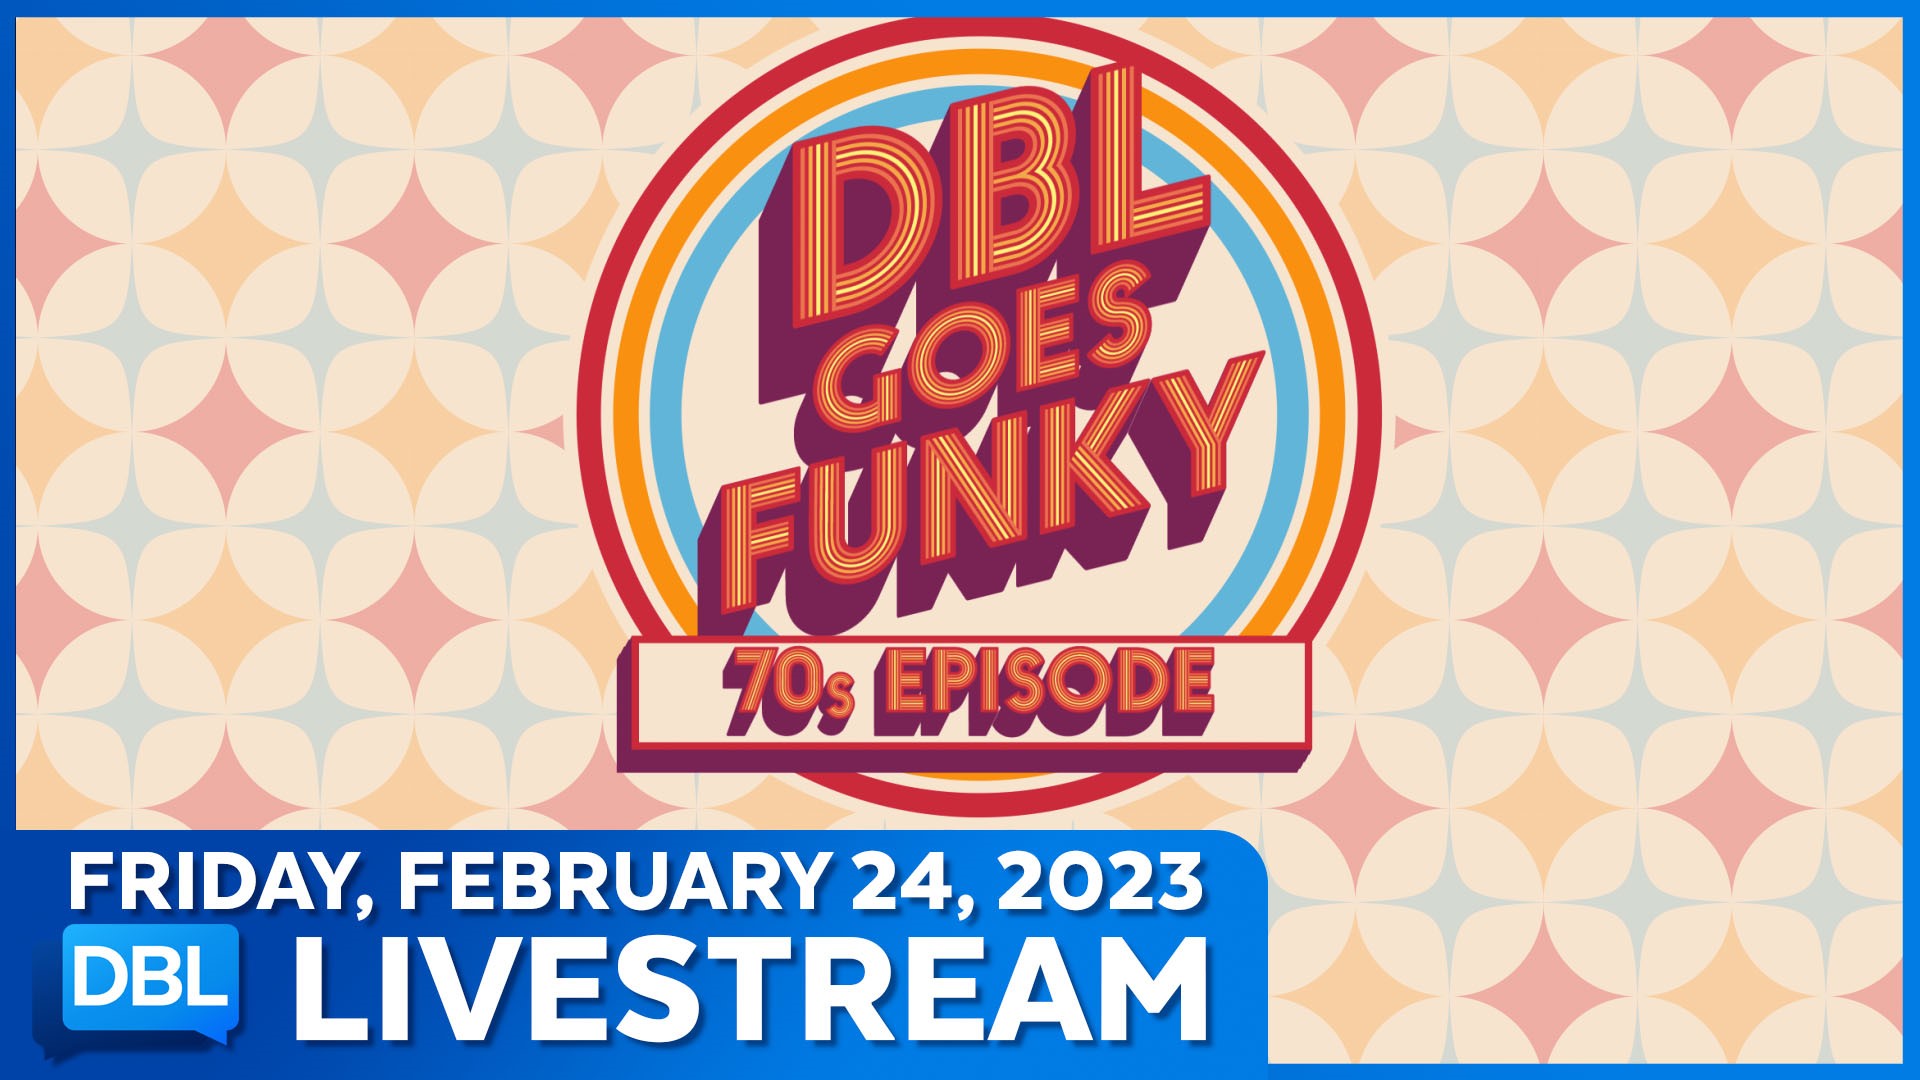 DBL goes 'funky' with an episode dedicated to the 70s! Bo Derek and Suzanne Somers join.